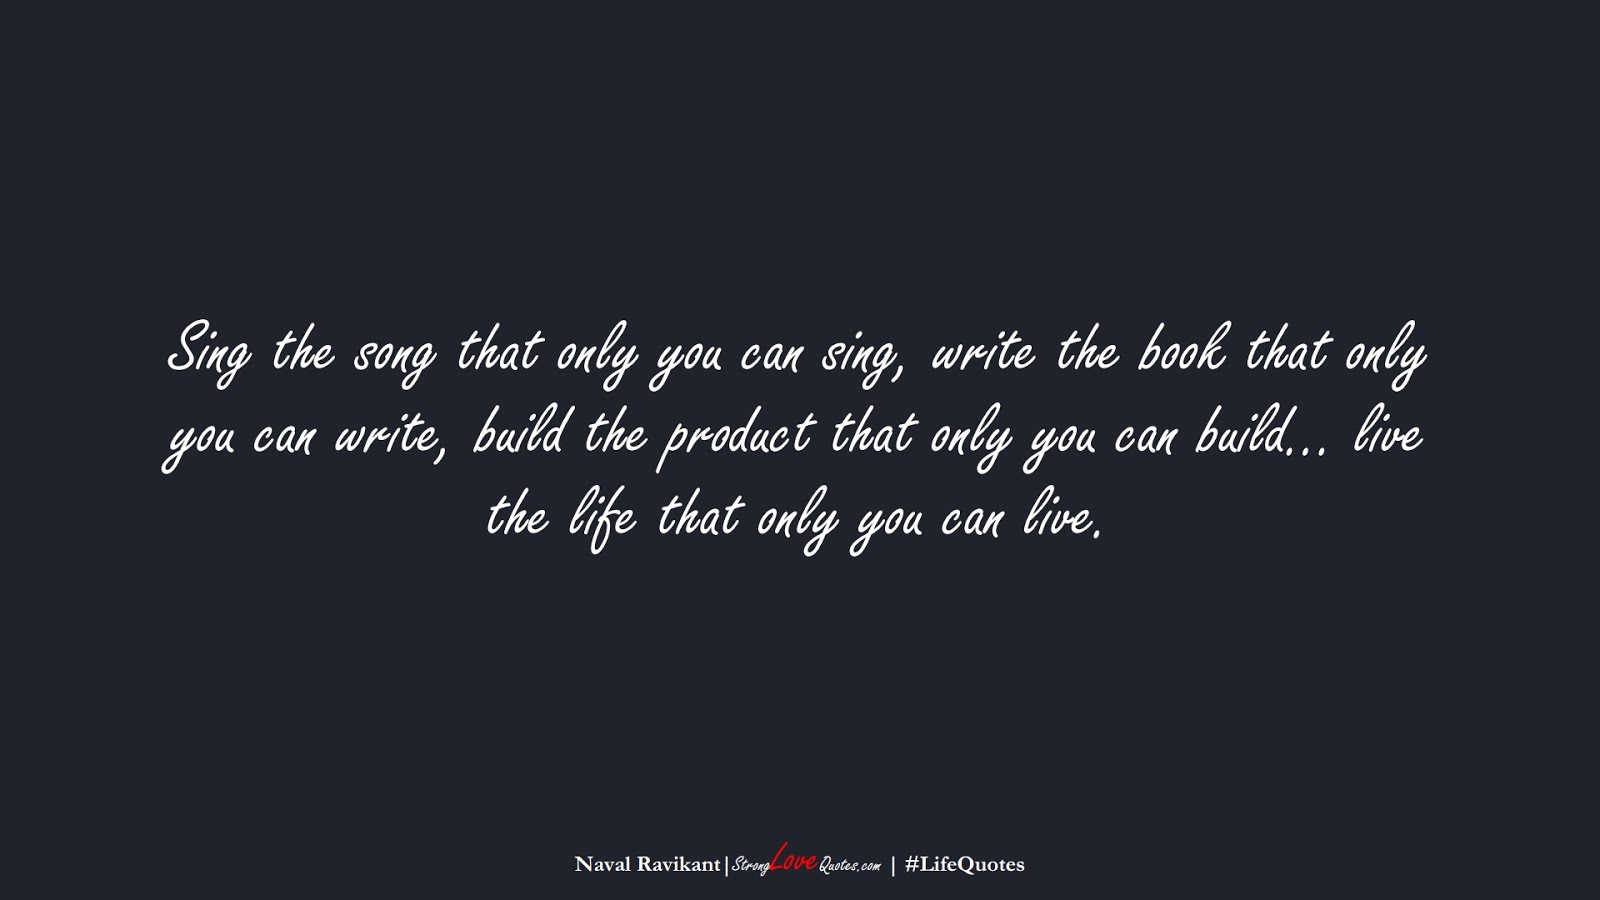 Sing the song that only you can sing, write the book that only you can write, build the product that only you can build… live the life that only you can live. (Naval Ravikant);  #LifeQuotes